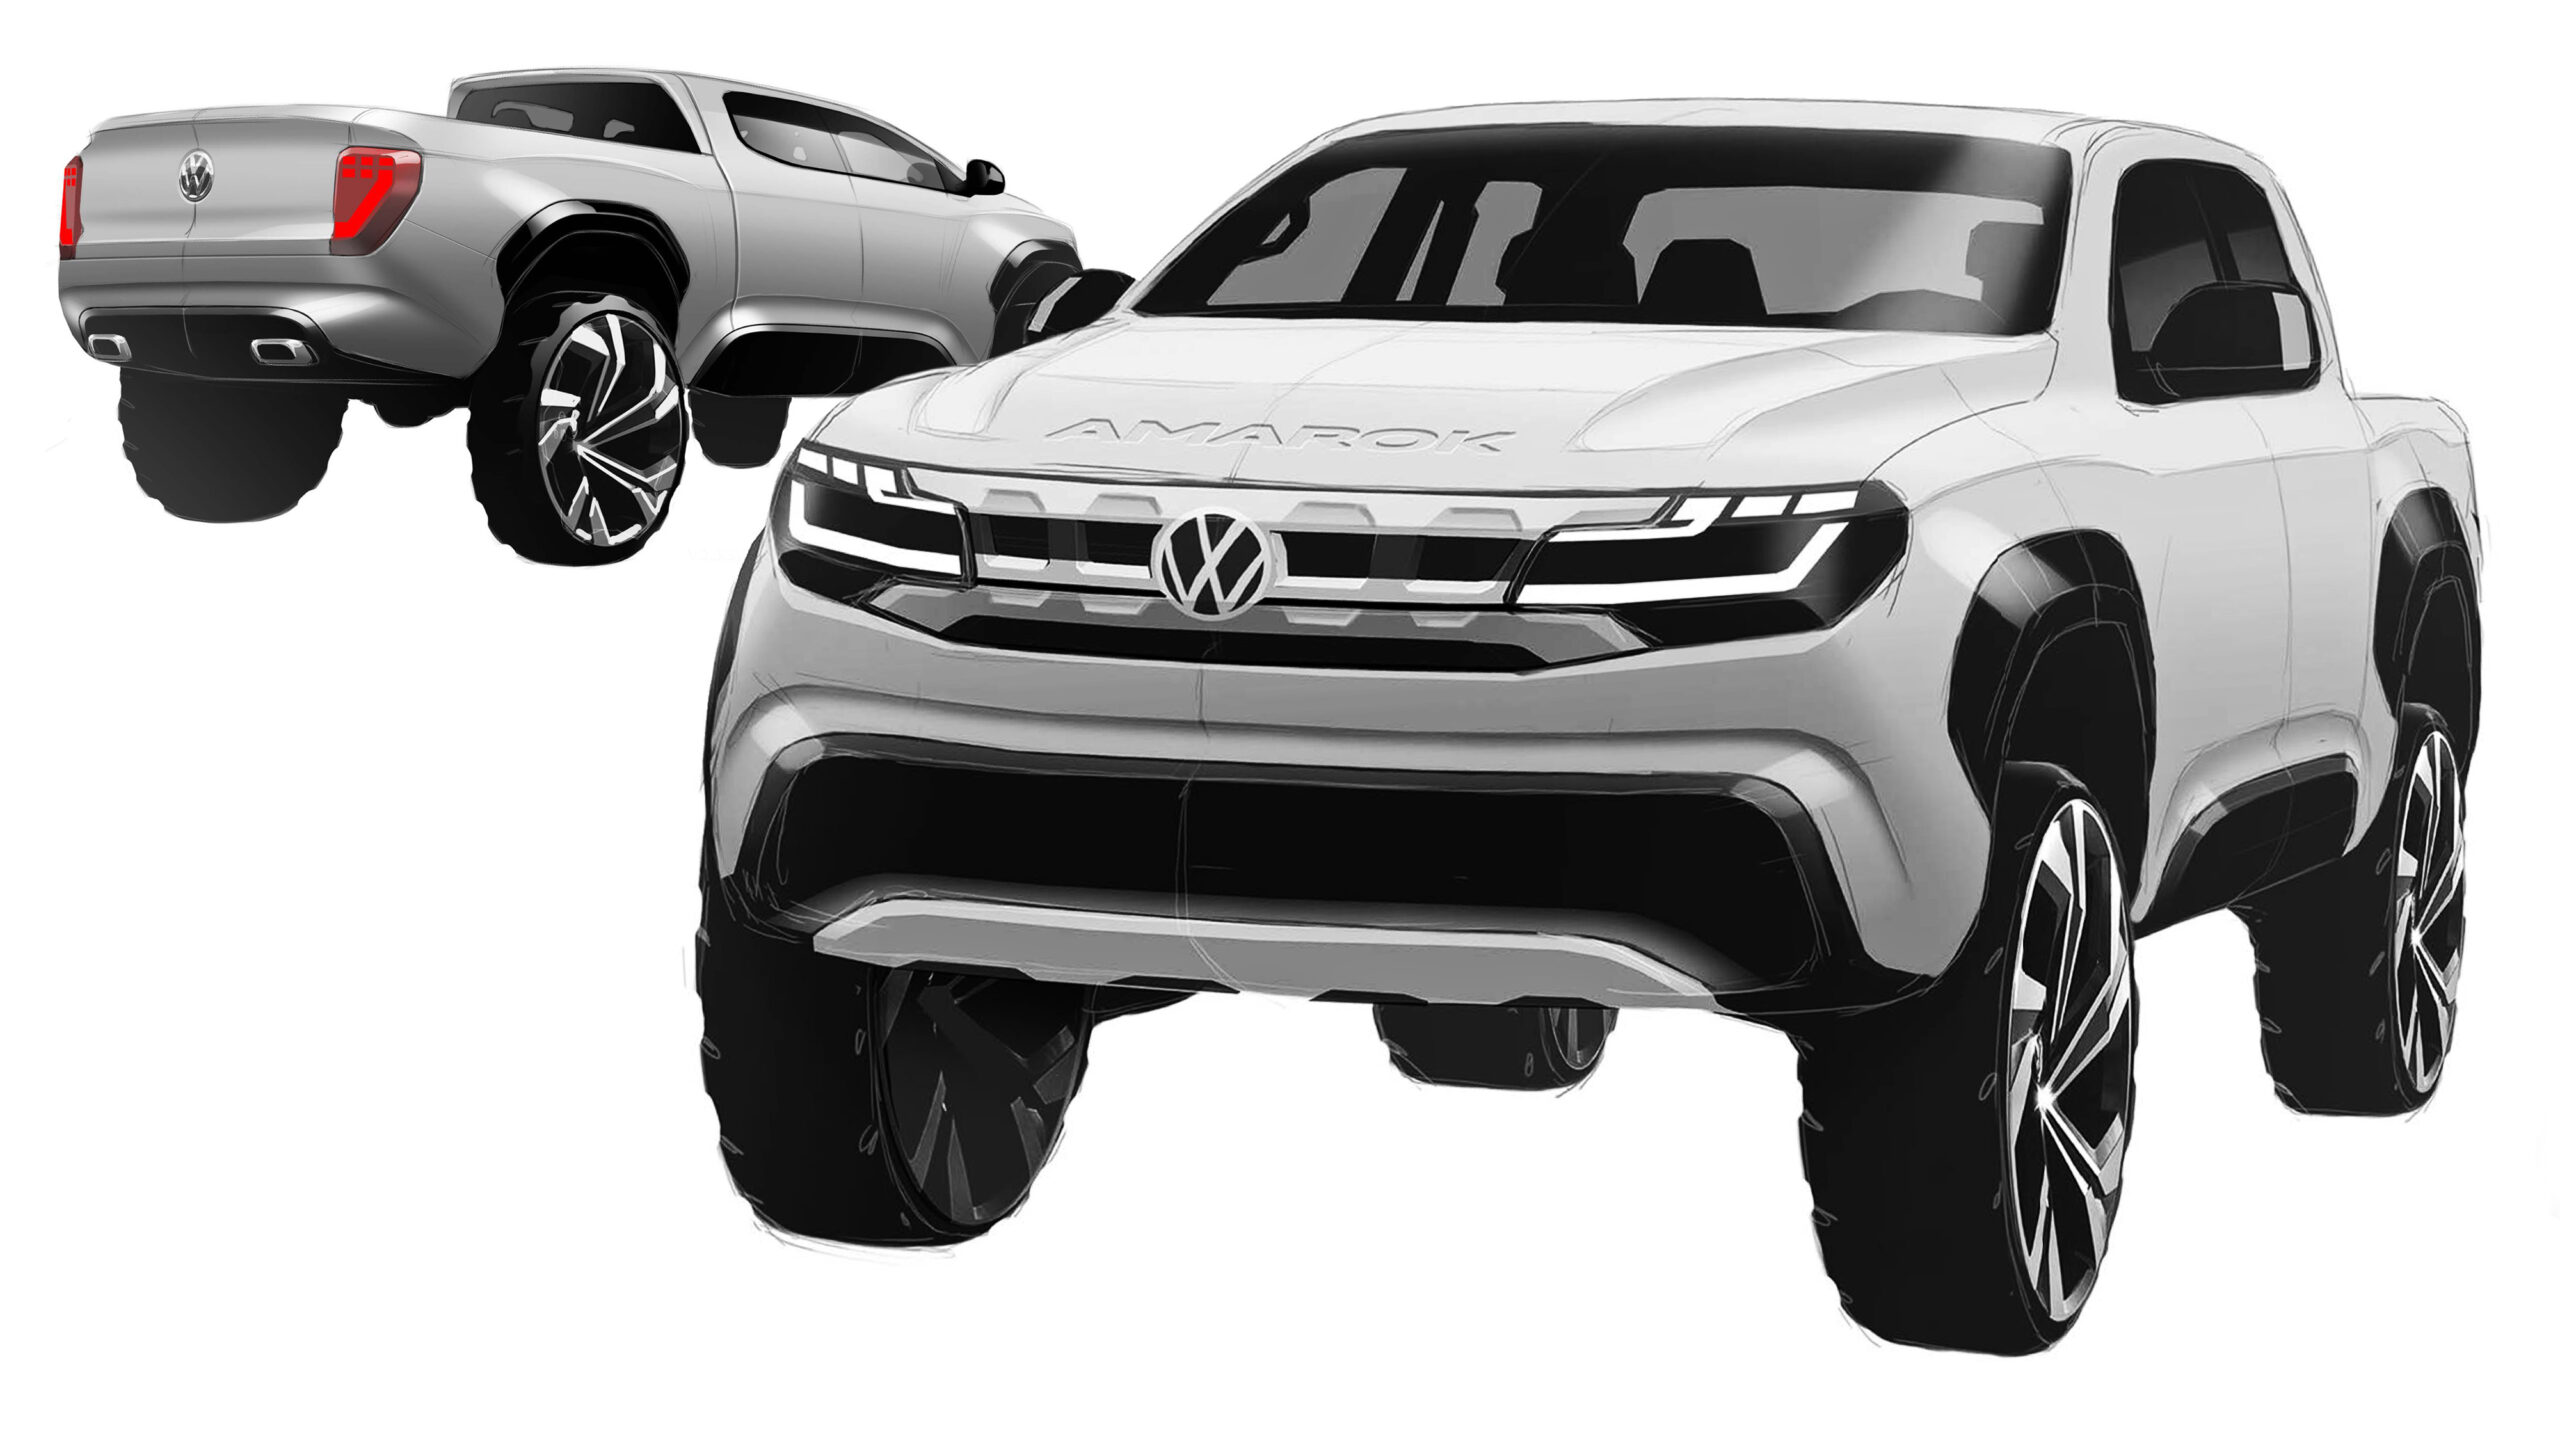 2023 Volkswagen Amarok pickup truck unveiled with Ford architecture -  Details here - autoX